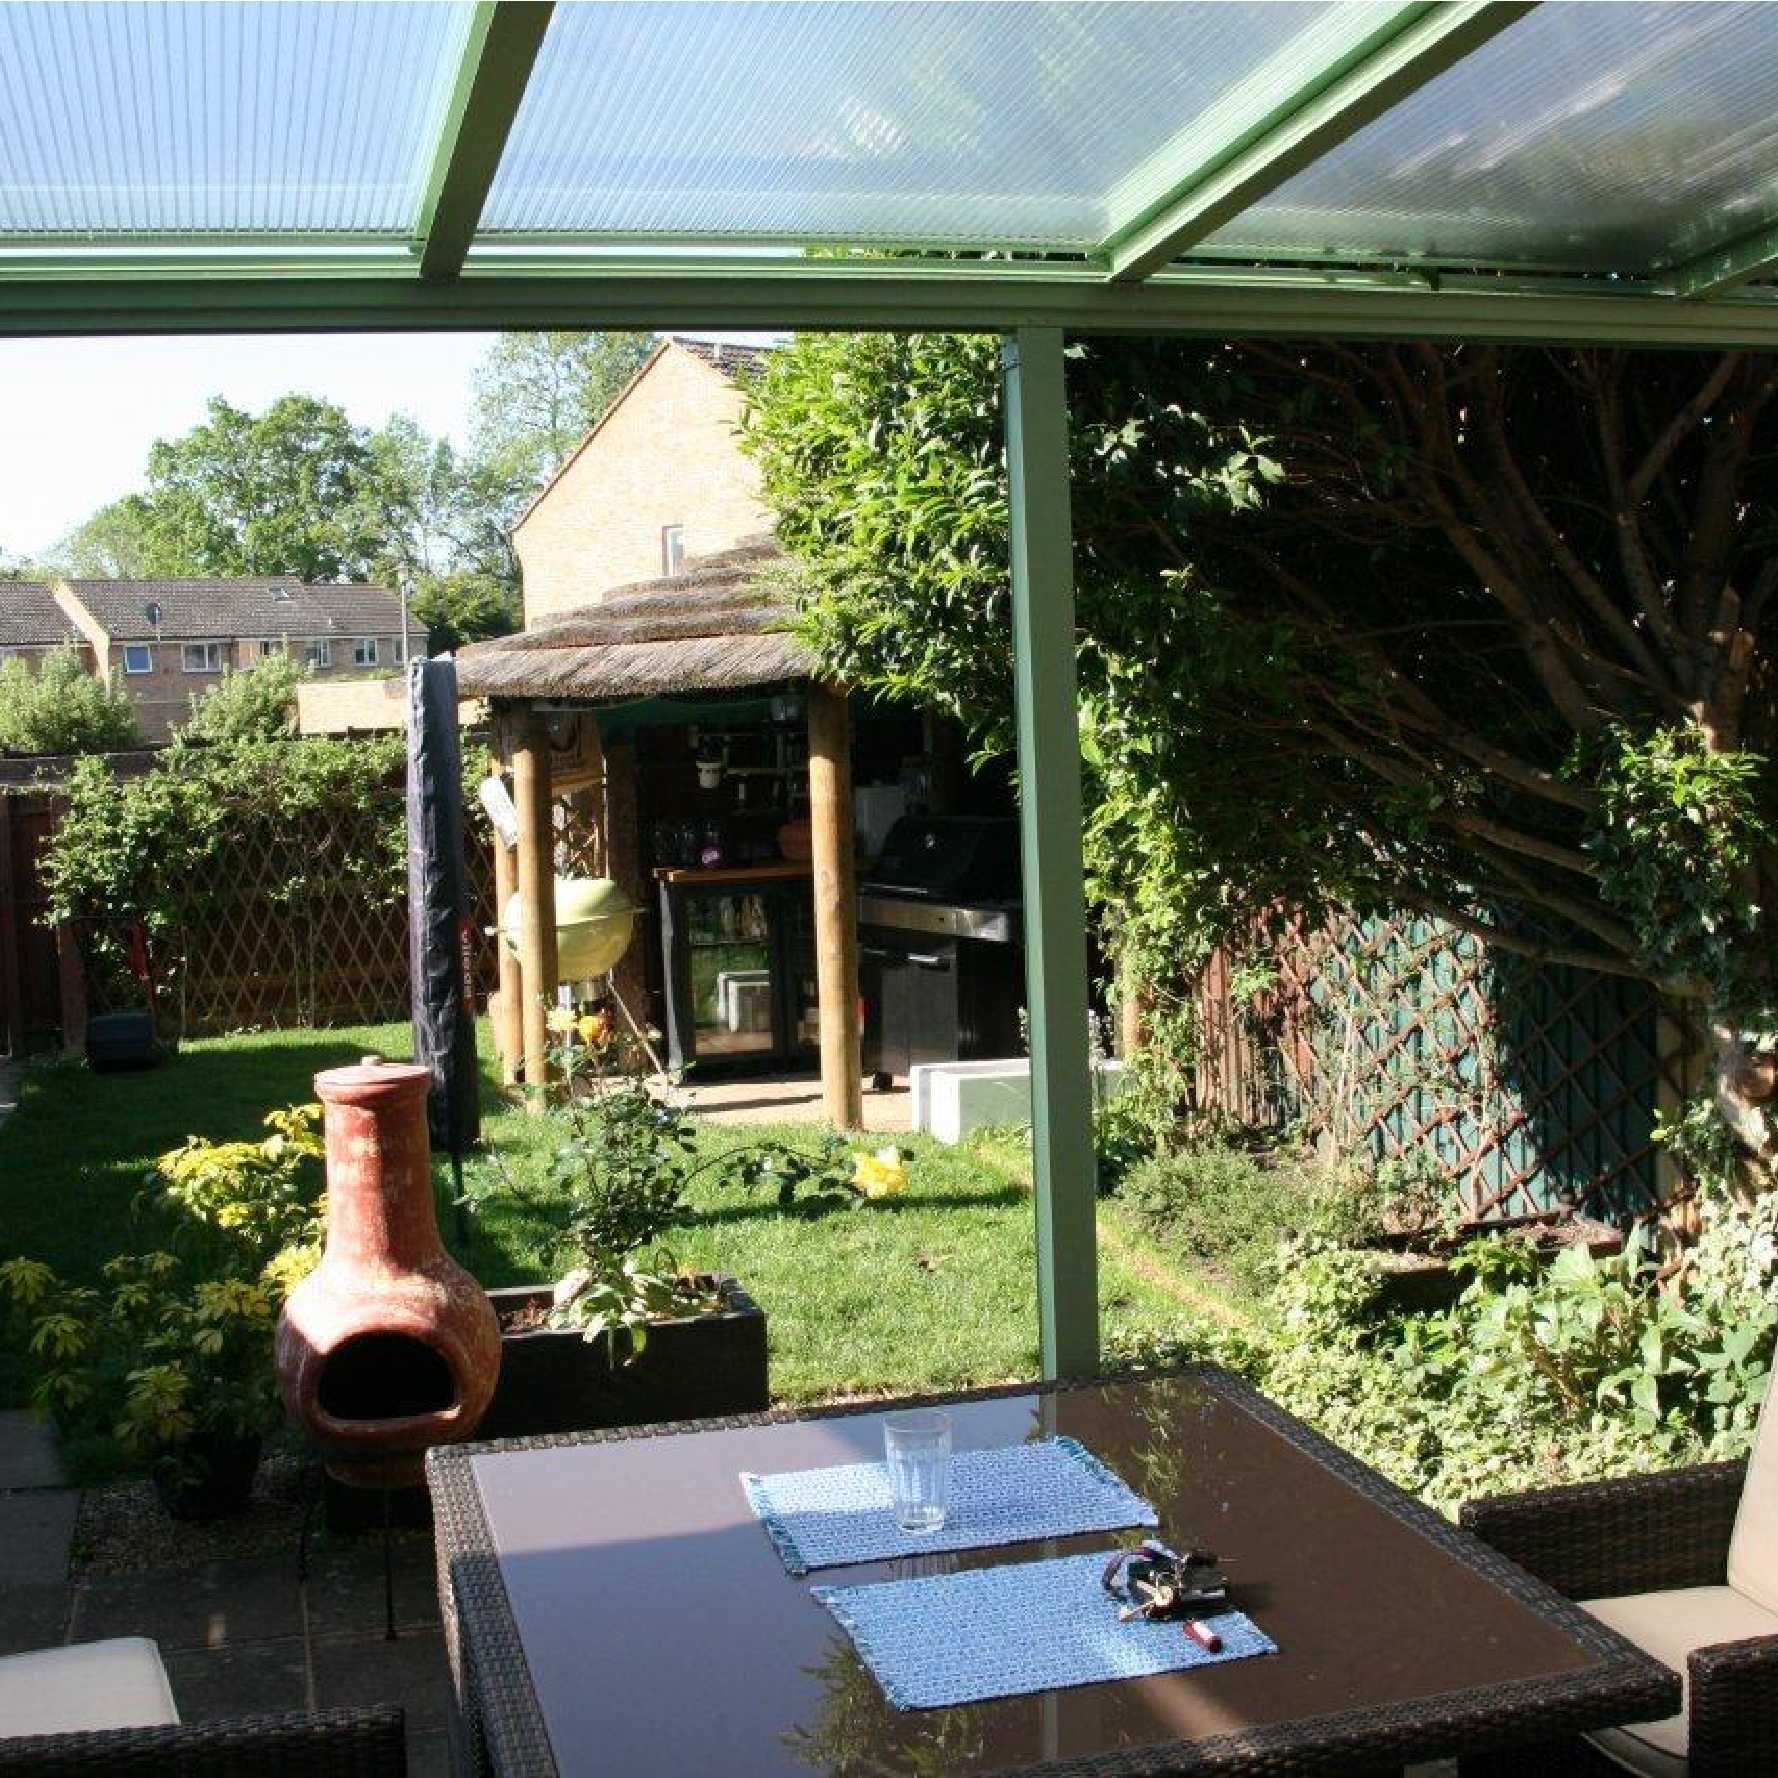 Affordable Omega Smart Lean-To Canopy, White with 16mm Polycarbonate Glazing - 6.0m (W) x 2.5m (P), (3) Supporting Posts